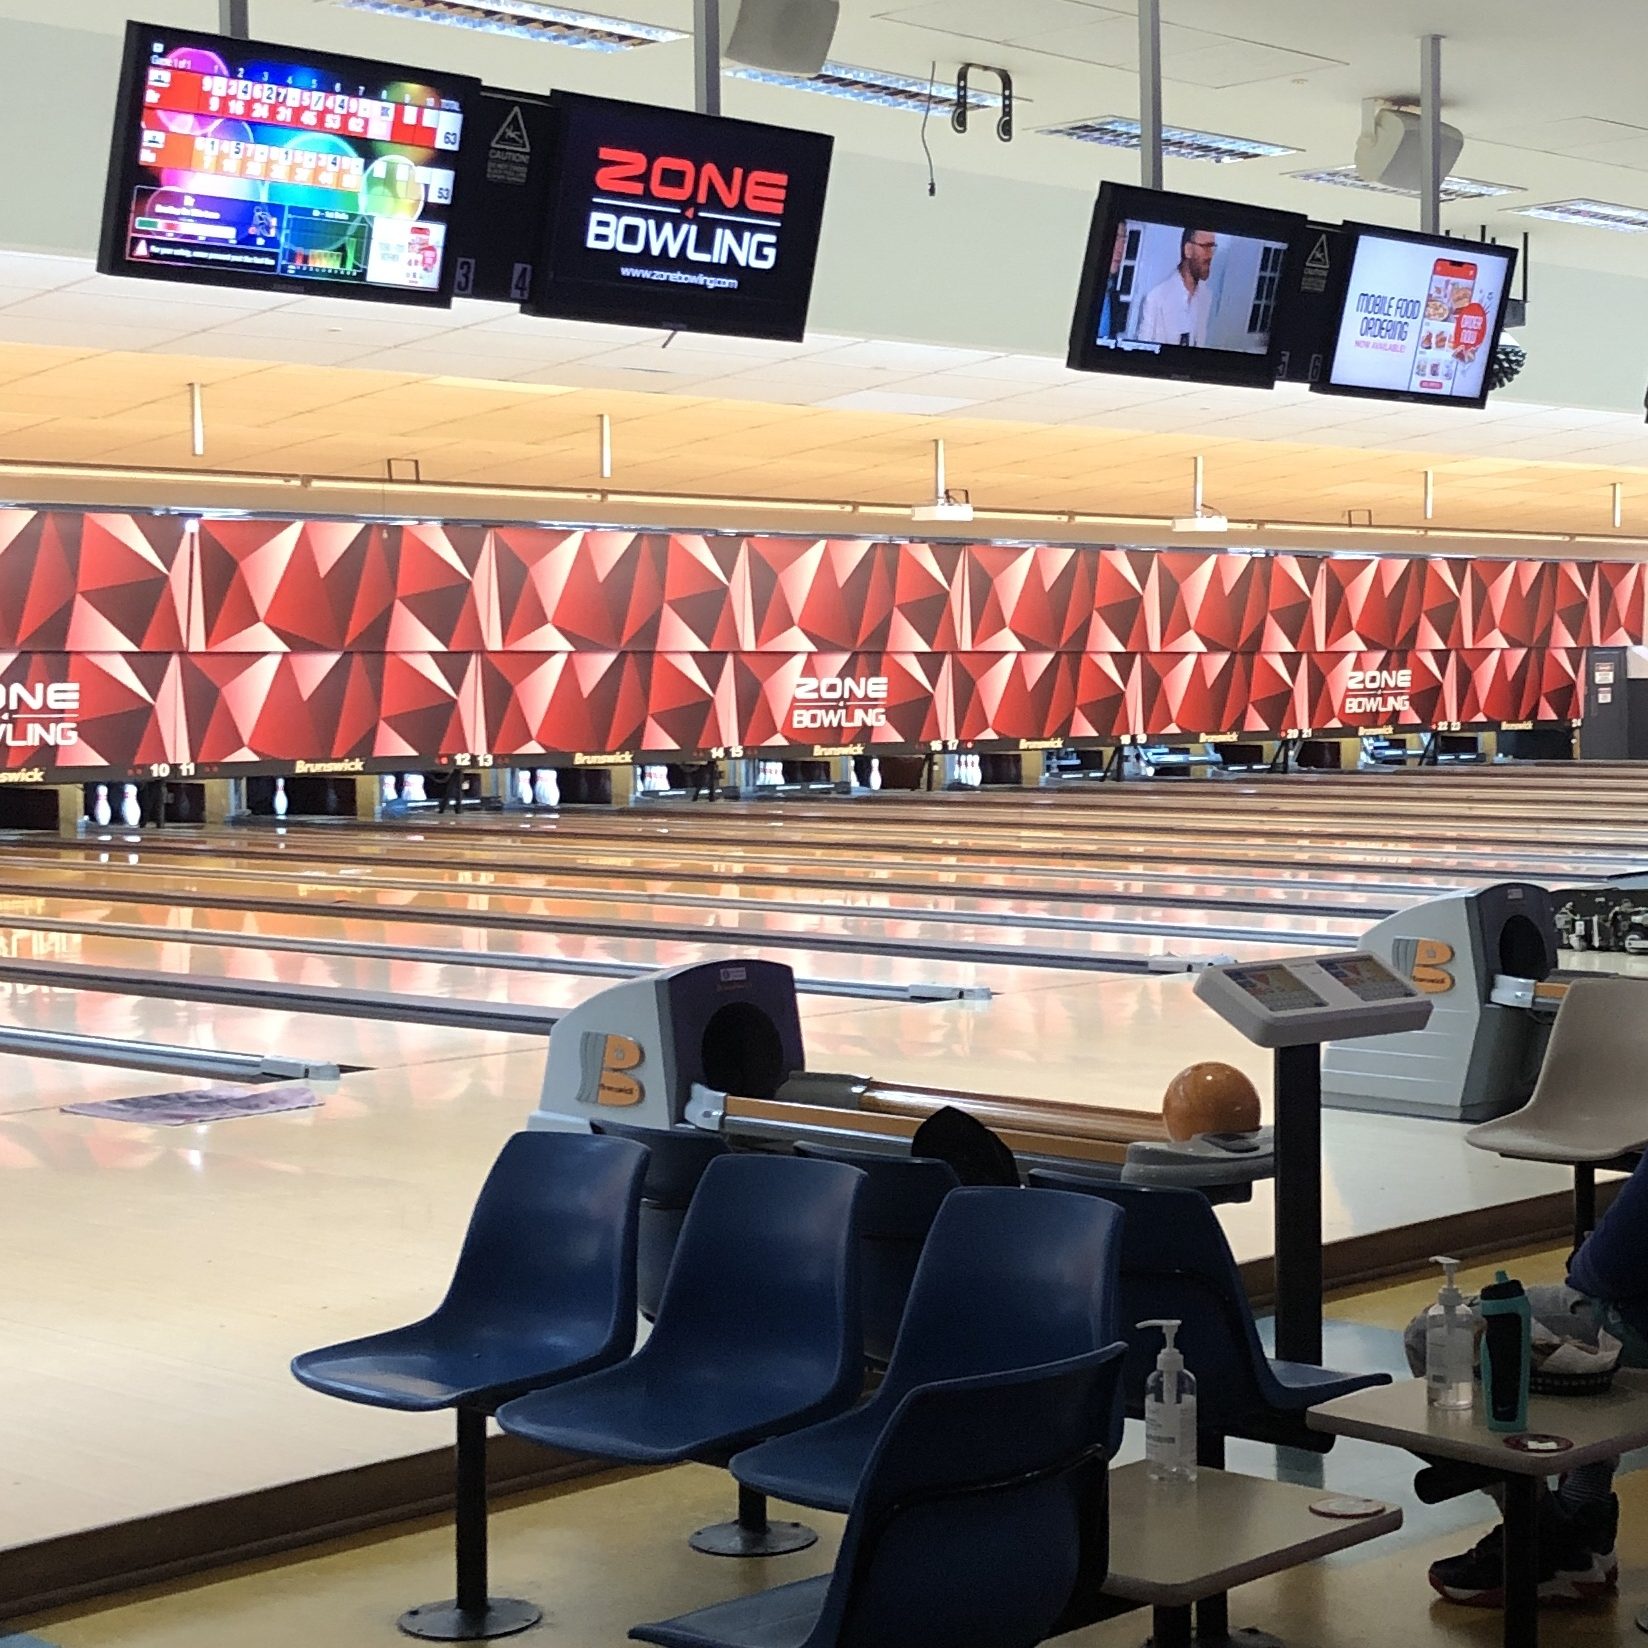 photo of a bowling alley with lanes, a call, some seats and tvs with scores on them